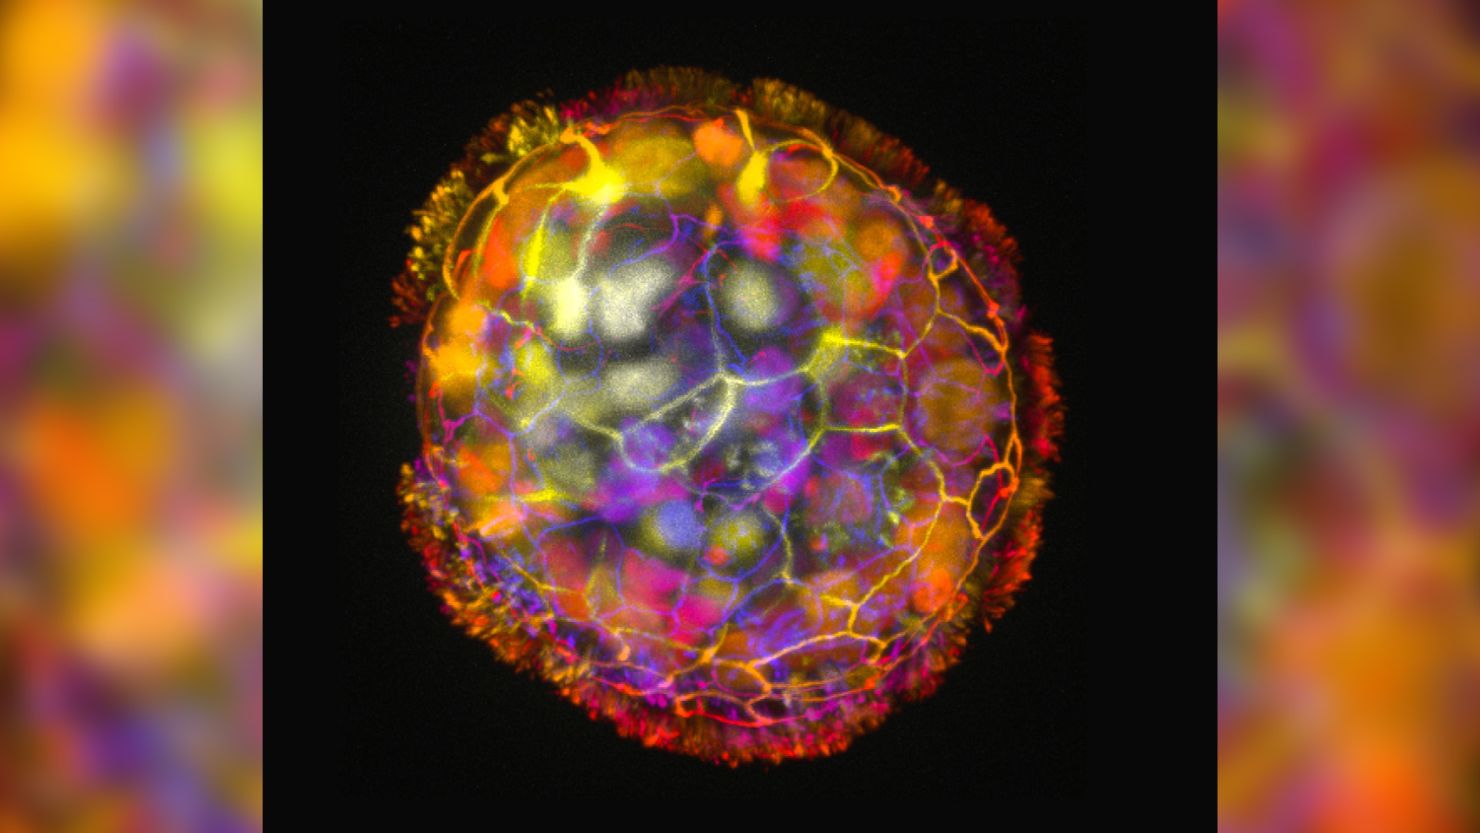 A colored image shows the multicellular structure of an anthrobot, surrounded by cilia on its surface, enabling it to move and explore its environment.